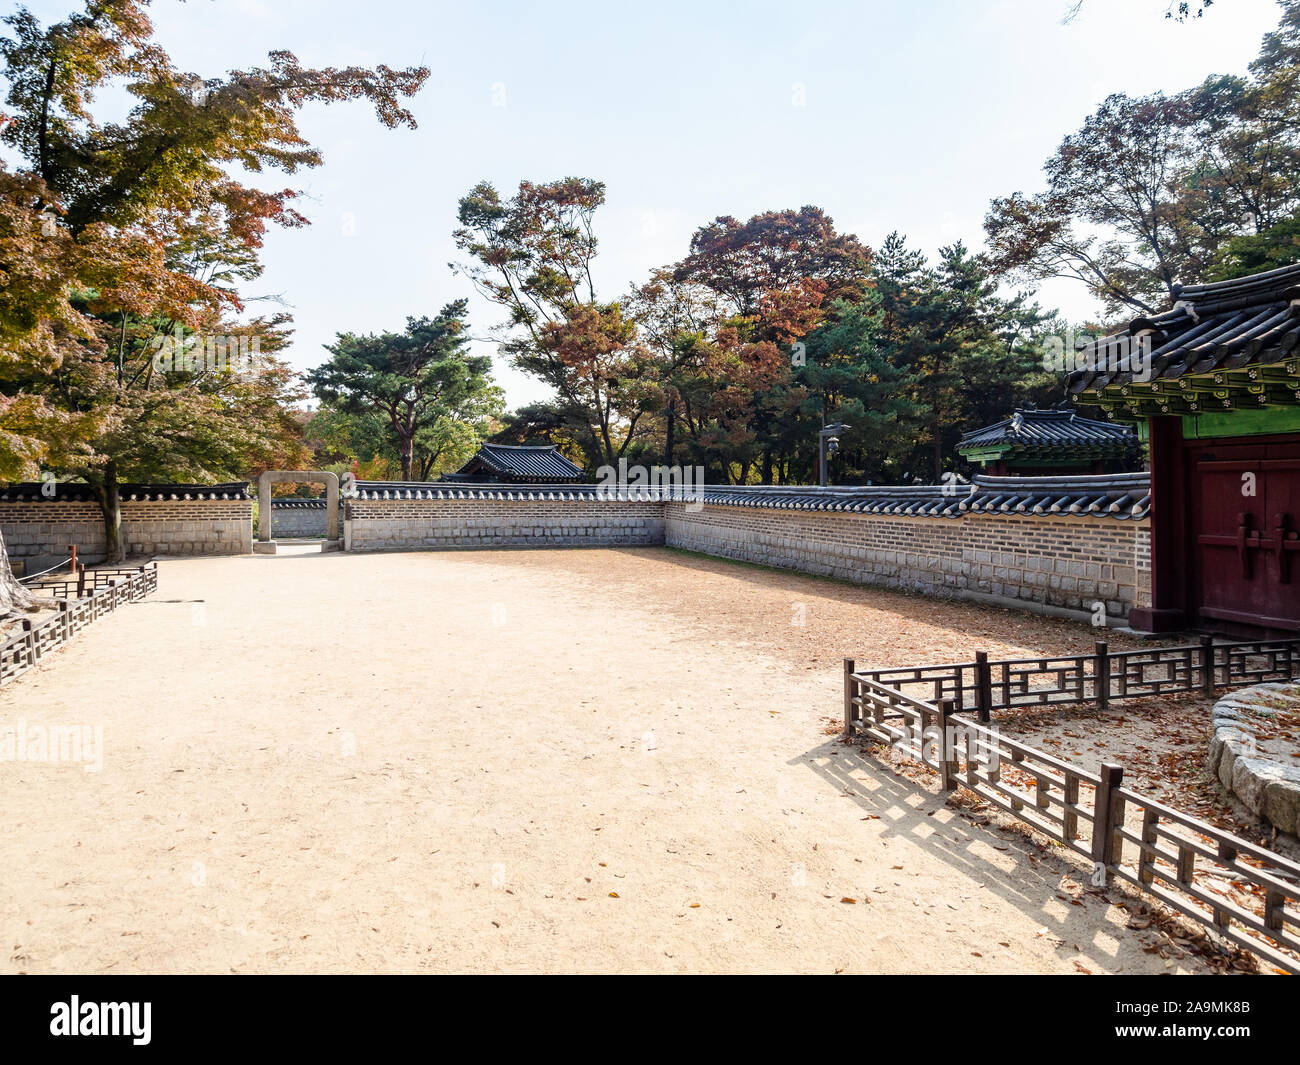 SEOUL, SOUTH KOREA - OCTOBER 31, 2019: area in front of entrance to Yeongyeongdang residence in Huwon Secret Rear Garden of Changdeokgung Palace Compl Stock Photo